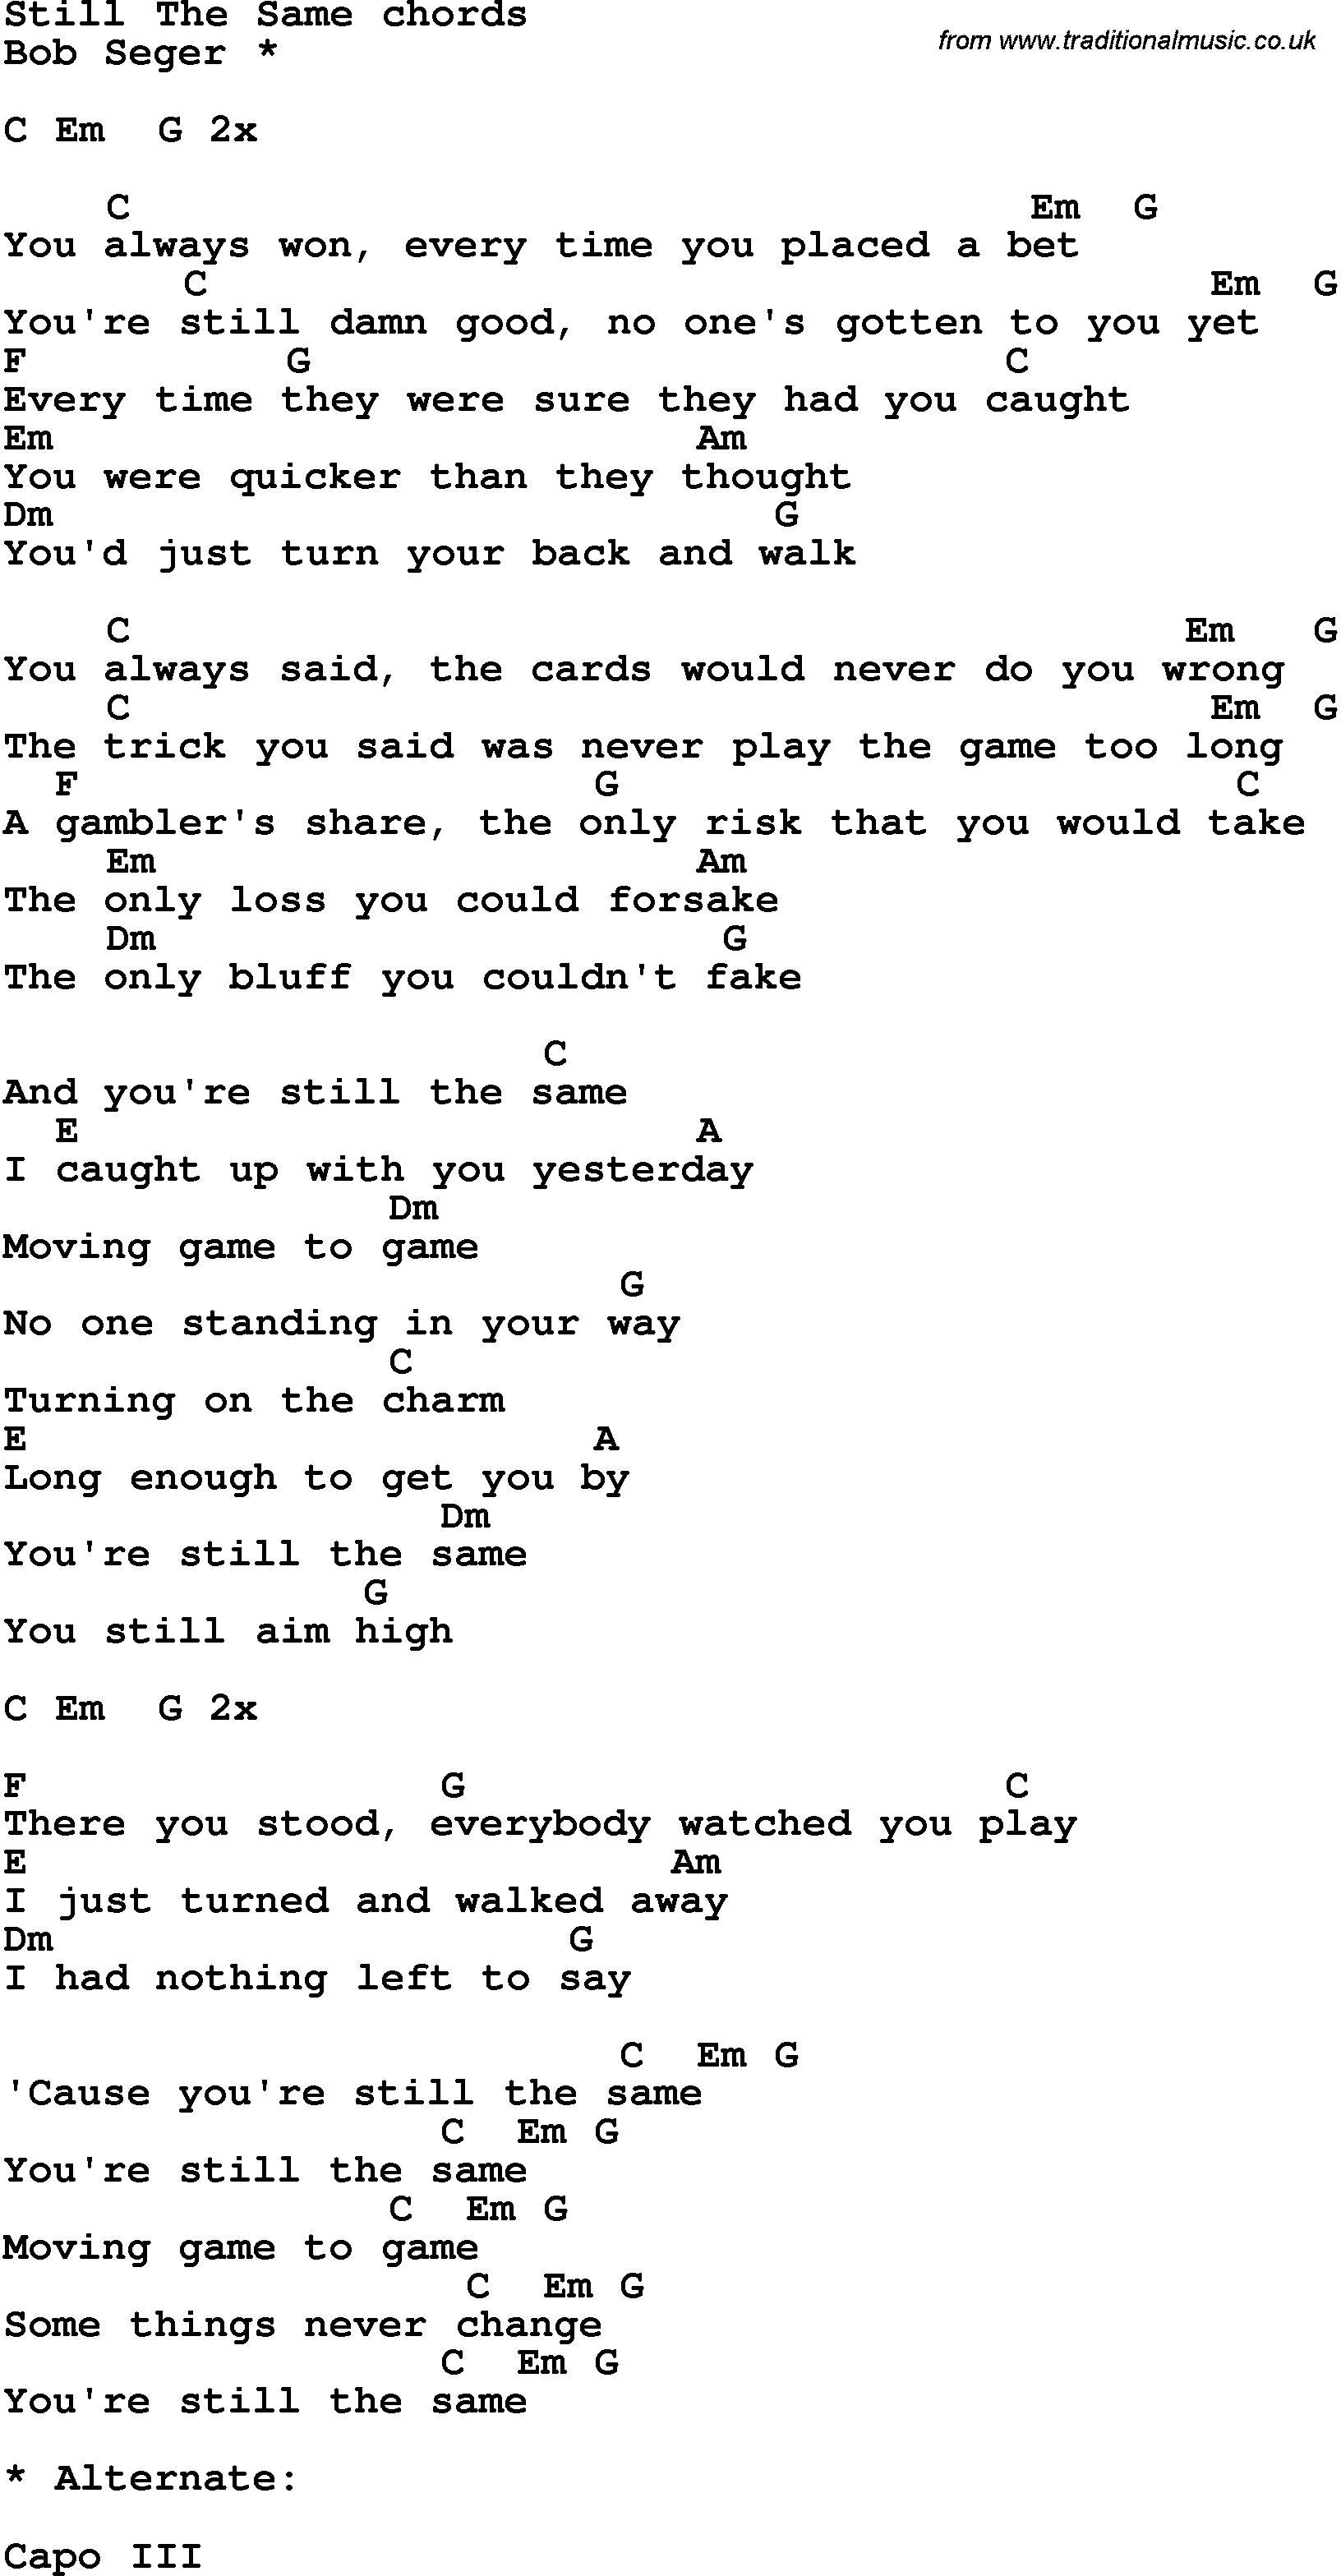 Song Lyrics with guitar chords for Still The Same